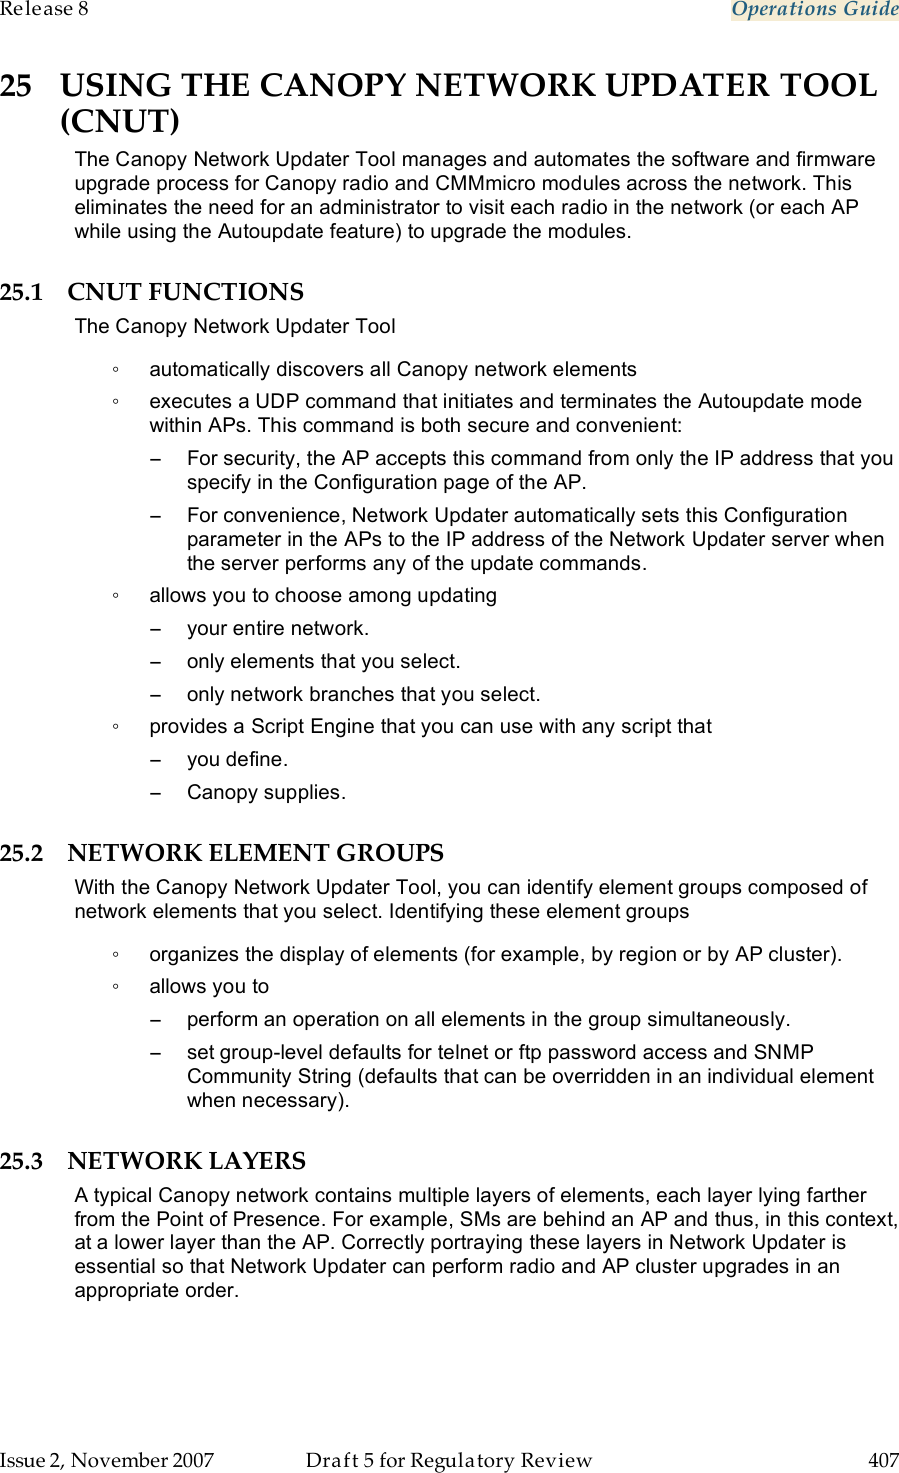 Release 8    Operations Guide   Issue 2, November 2007  Draft 5 for Regulatory Review  407     25 USING THE CANOPY NETWORK UPDATER TOOL (CNUT) The Canopy Network Updater Tool manages and automates the software and firmware upgrade process for Canopy radio and CMMmicro modules across the network. This eliminates the need for an administrator to visit each radio in the network (or each AP while using the Autoupdate feature) to upgrade the modules.  25.1 CNUT FUNCTIONS The Canopy Network Updater Tool ◦  automatically discovers all Canopy network elements ◦  executes a UDP command that initiates and terminates the Autoupdate mode within APs. This command is both secure and convenient: −  For security, the AP accepts this command from only the IP address that you specify in the Configuration page of the AP.  −  For convenience, Network Updater automatically sets this Configuration parameter in the APs to the IP address of the Network Updater server when the server performs any of the update commands. ◦  allows you to choose among updating −  your entire network. −  only elements that you select. −  only network branches that you select. ◦  provides a Script Engine that you can use with any script that −  you define. −  Canopy supplies. 25.2 NETWORK ELEMENT GROUPS  With the Canopy Network Updater Tool, you can identify element groups composed of network elements that you select. Identifying these element groups ◦  organizes the display of elements (for example, by region or by AP cluster). ◦  allows you to  −  perform an operation on all elements in the group simultaneously. −  set group-level defaults for telnet or ftp password access and SNMP Community String (defaults that can be overridden in an individual element when necessary). 25.3 NETWORK LAYERS A typical Canopy network contains multiple layers of elements, each layer lying farther from the Point of Presence. For example, SMs are behind an AP and thus, in this context, at a lower layer than the AP. Correctly portraying these layers in Network Updater is essential so that Network Updater can perform radio and AP cluster upgrades in an appropriate order. 